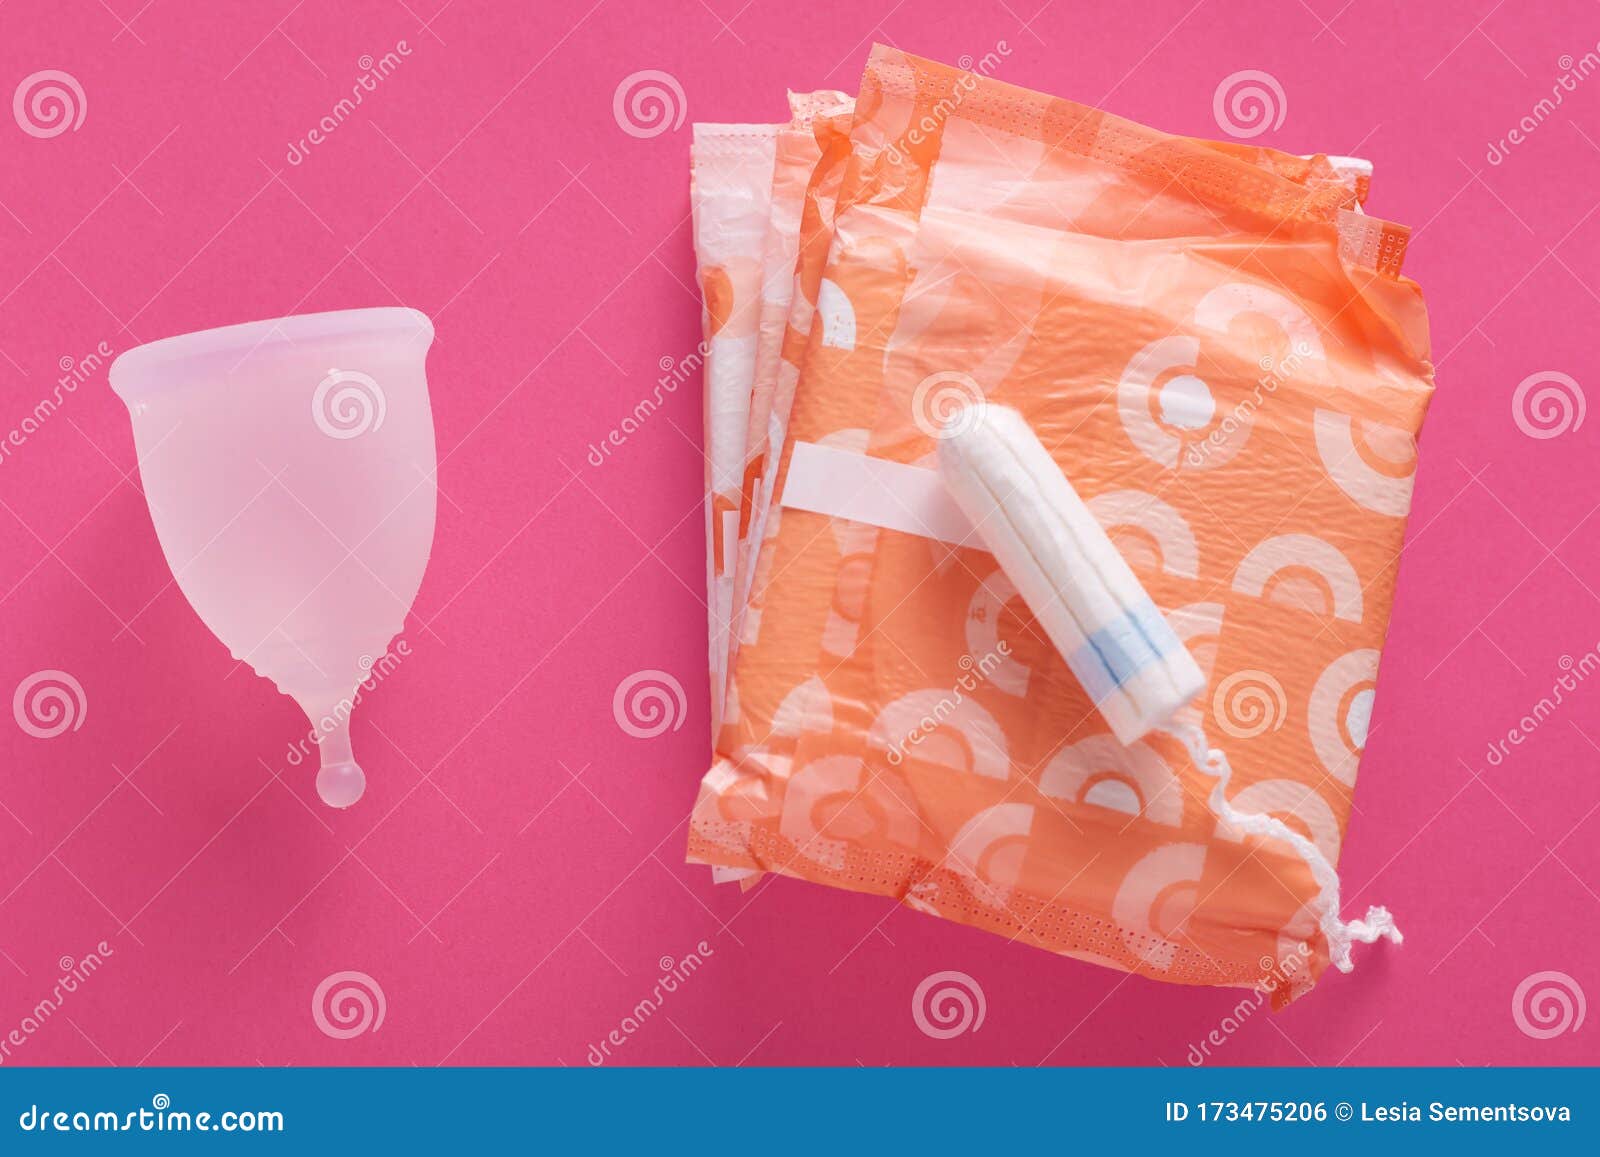 Different Types of Feminine Hygiene Products, Menstrual Cup